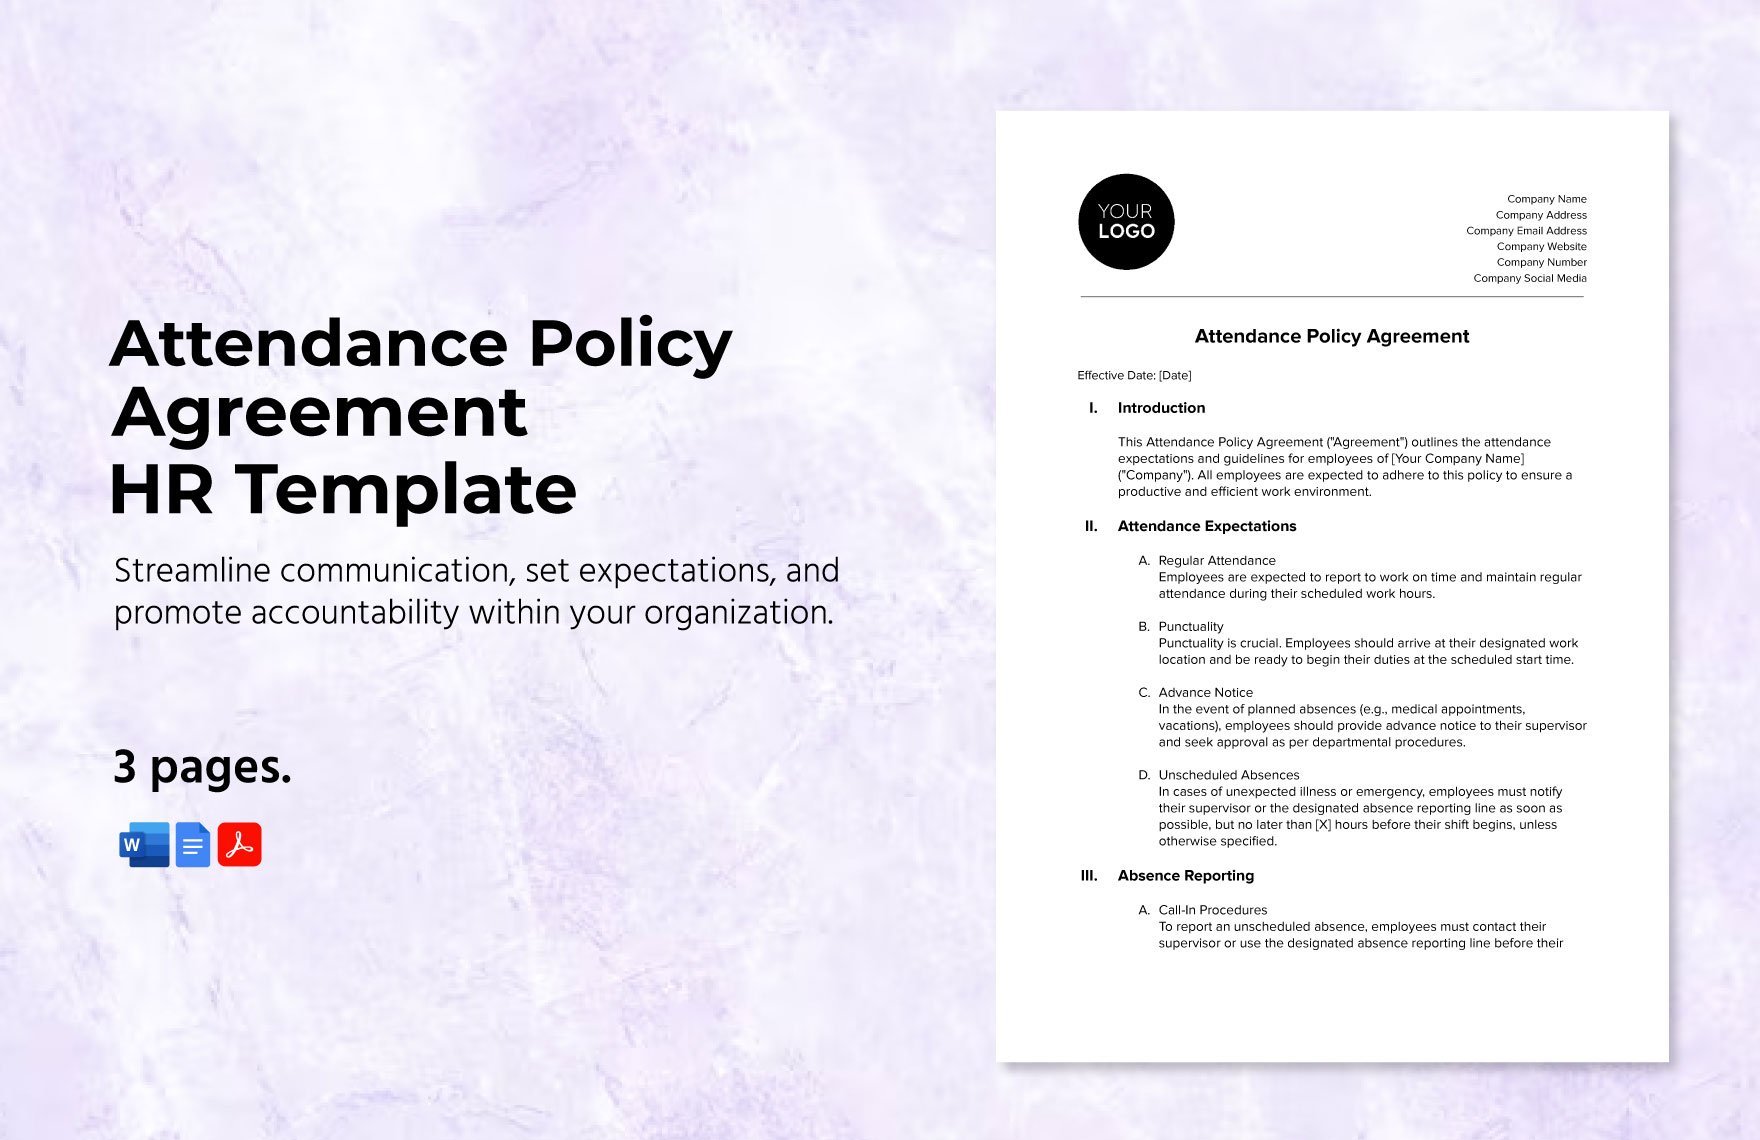 Attendance Policy Agreement HR Template